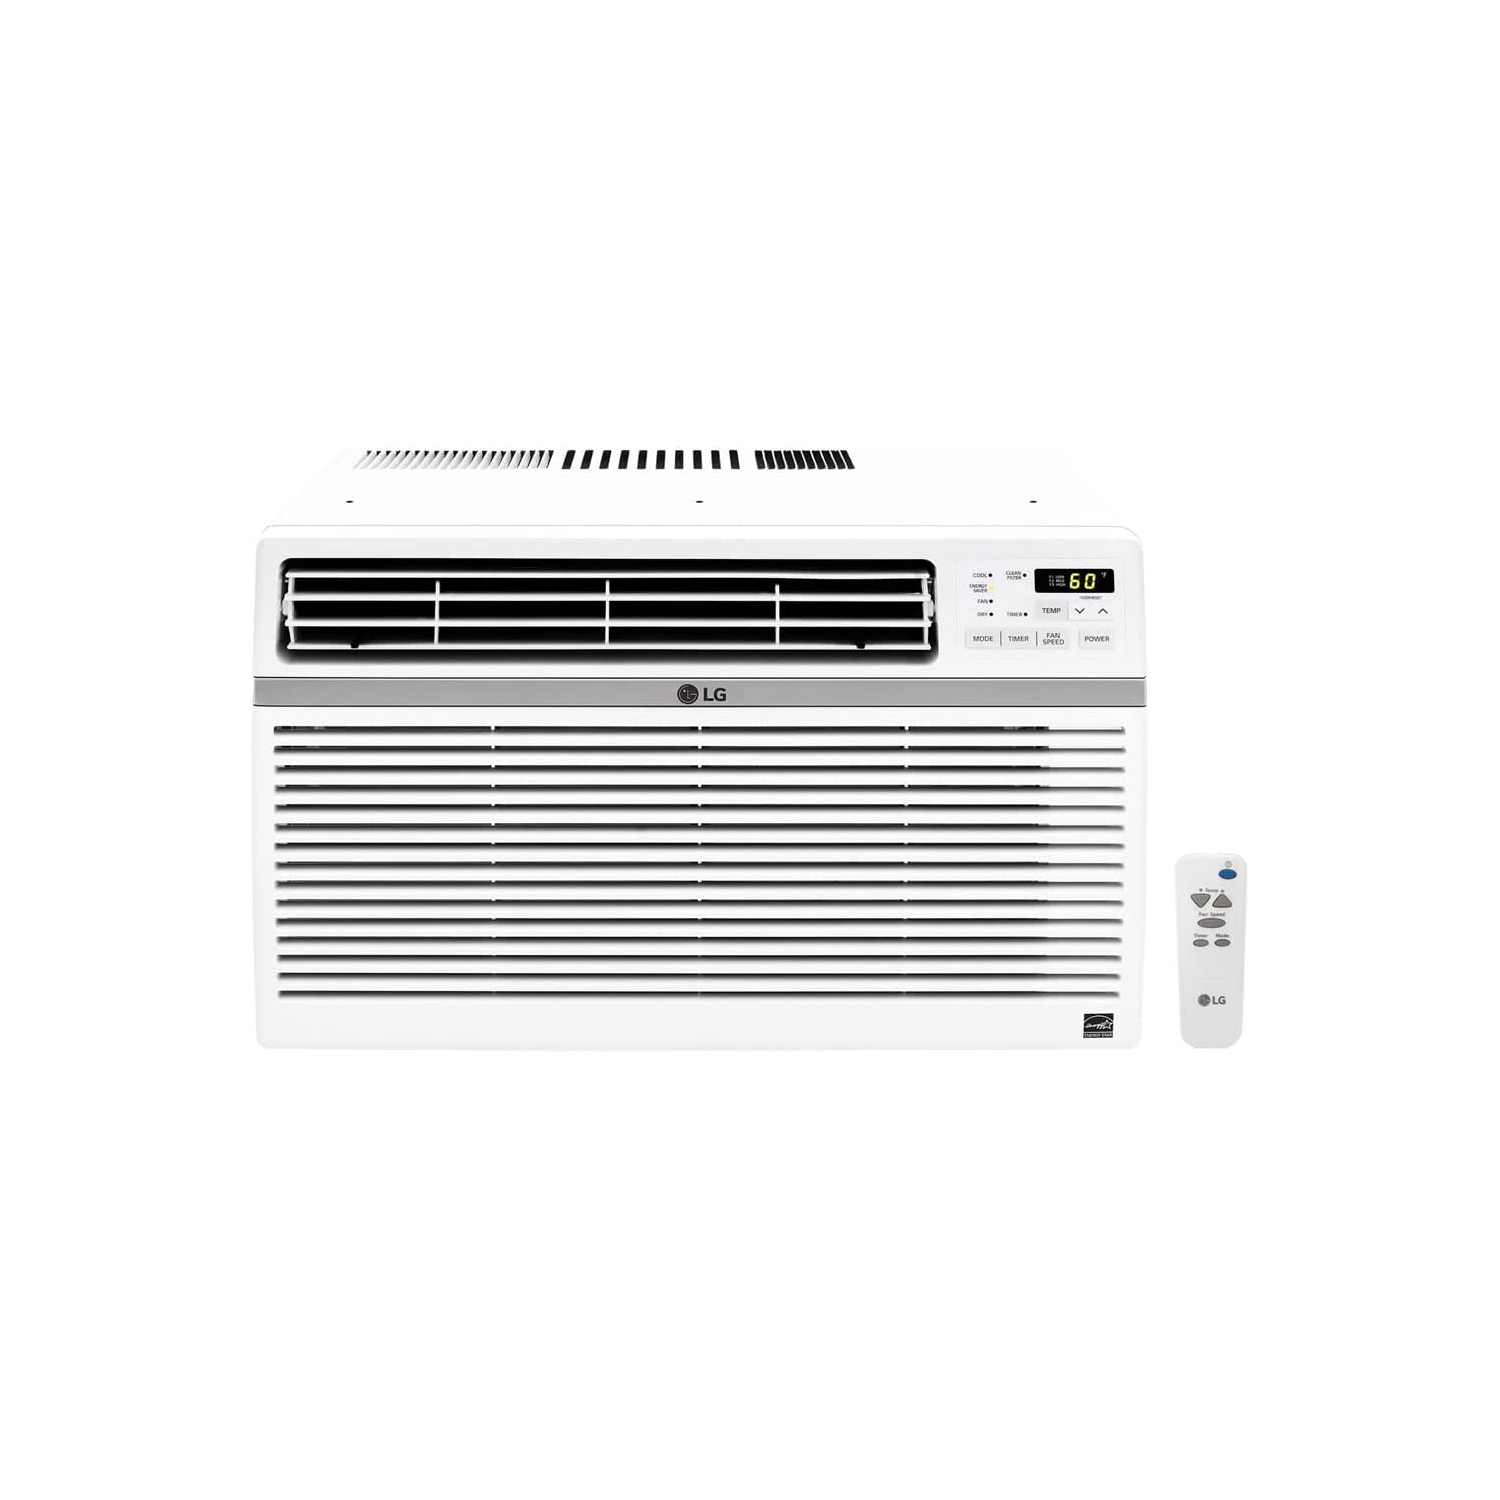 LG 12,000 BTU Window Air Conditioner, Cools 550 Sq.Ft. (22' x 25' Room Size), Quiet Operation, Electronic Control with Remote, 3 Cooling & Fan Speeds, 115V (LW1216ER)